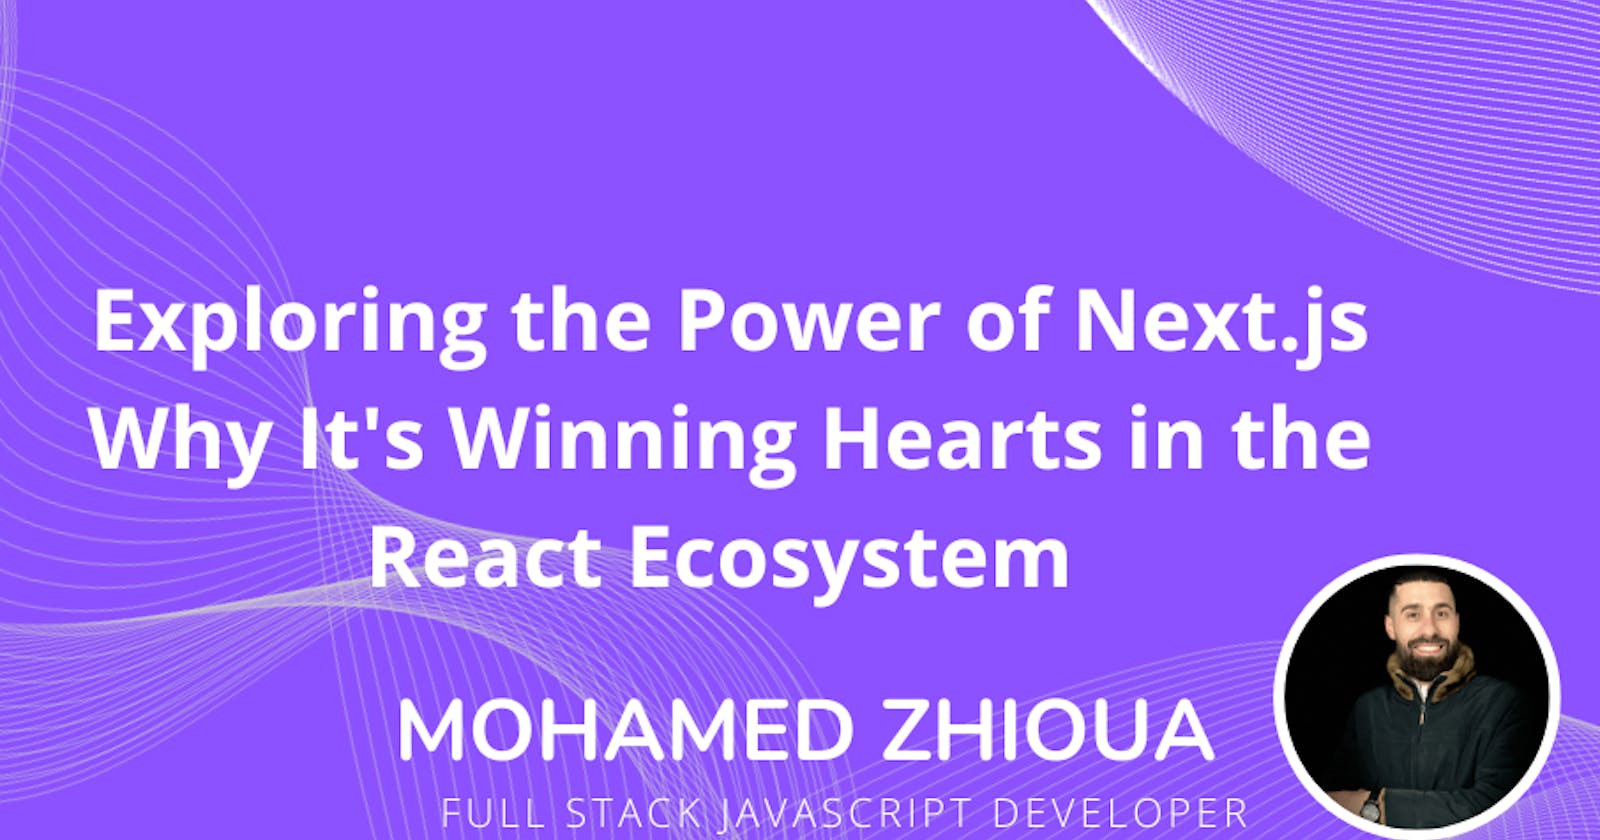 Exploring the Power of Next.js: Why It's Winning Hearts in the React Ecosystem